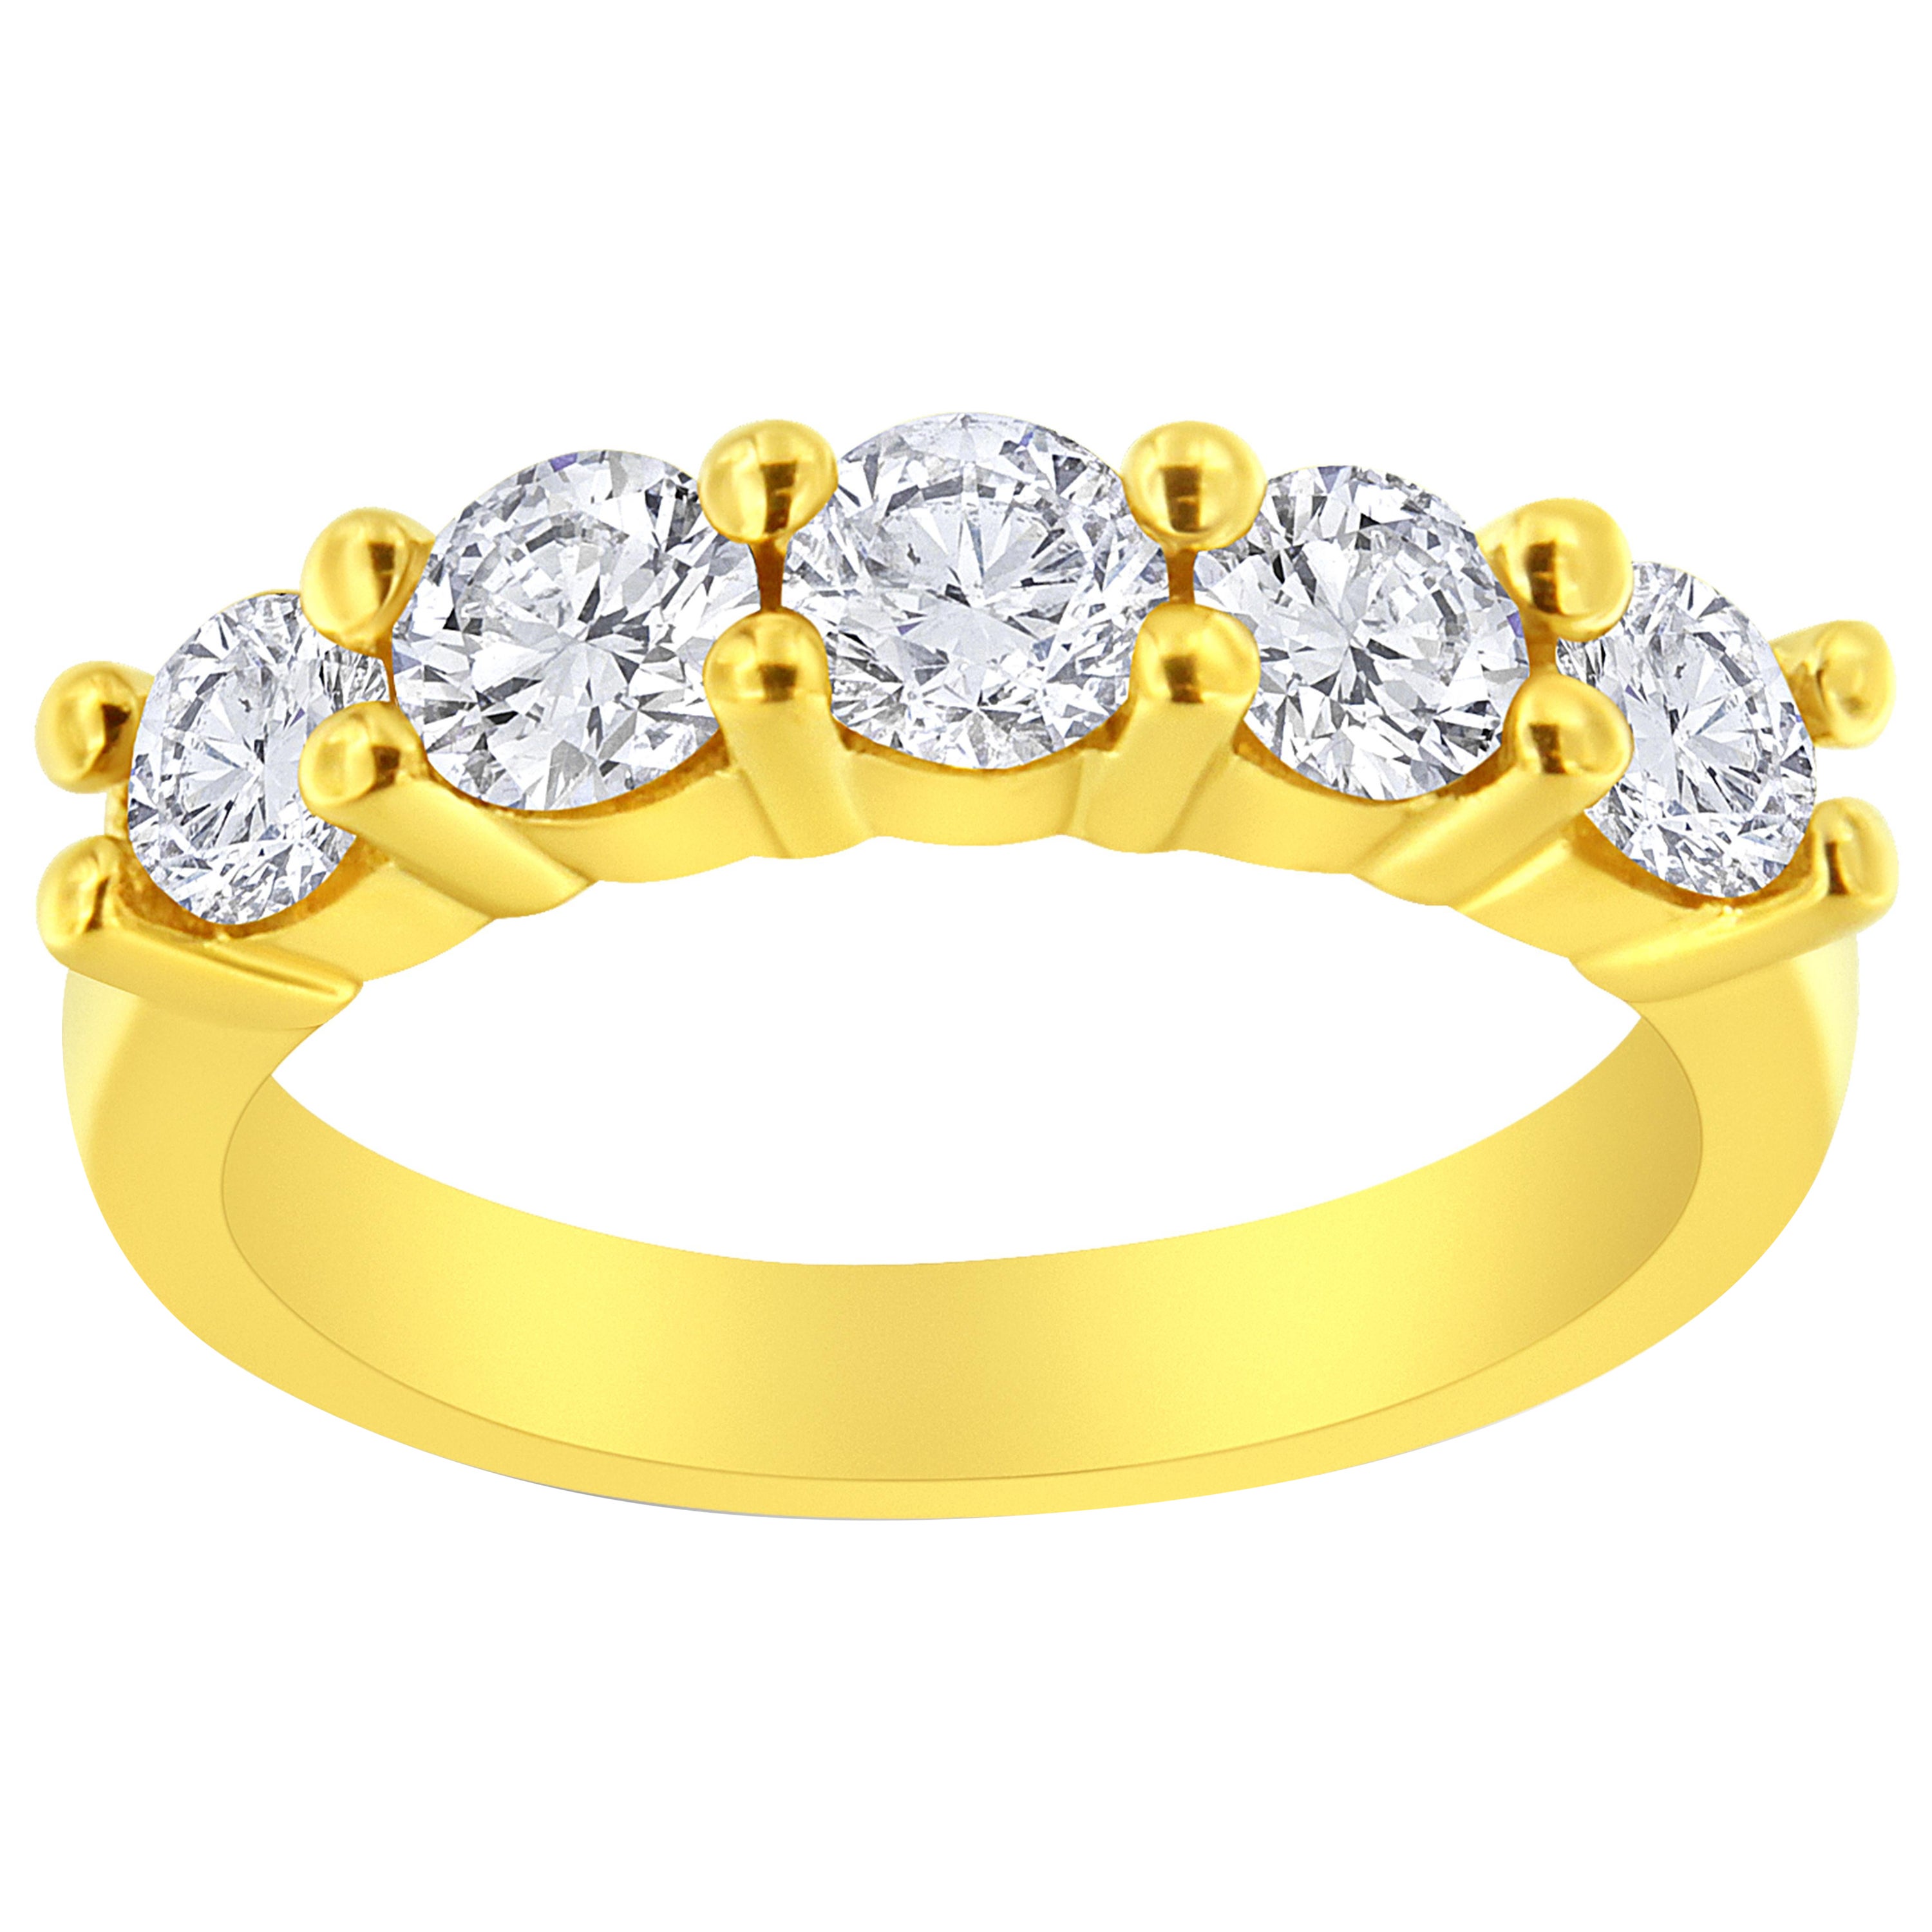 14K Yellow Gold Over Silver 1 1/2 Cttw Diamond Anniversary or Wedding Band Ring For Sale